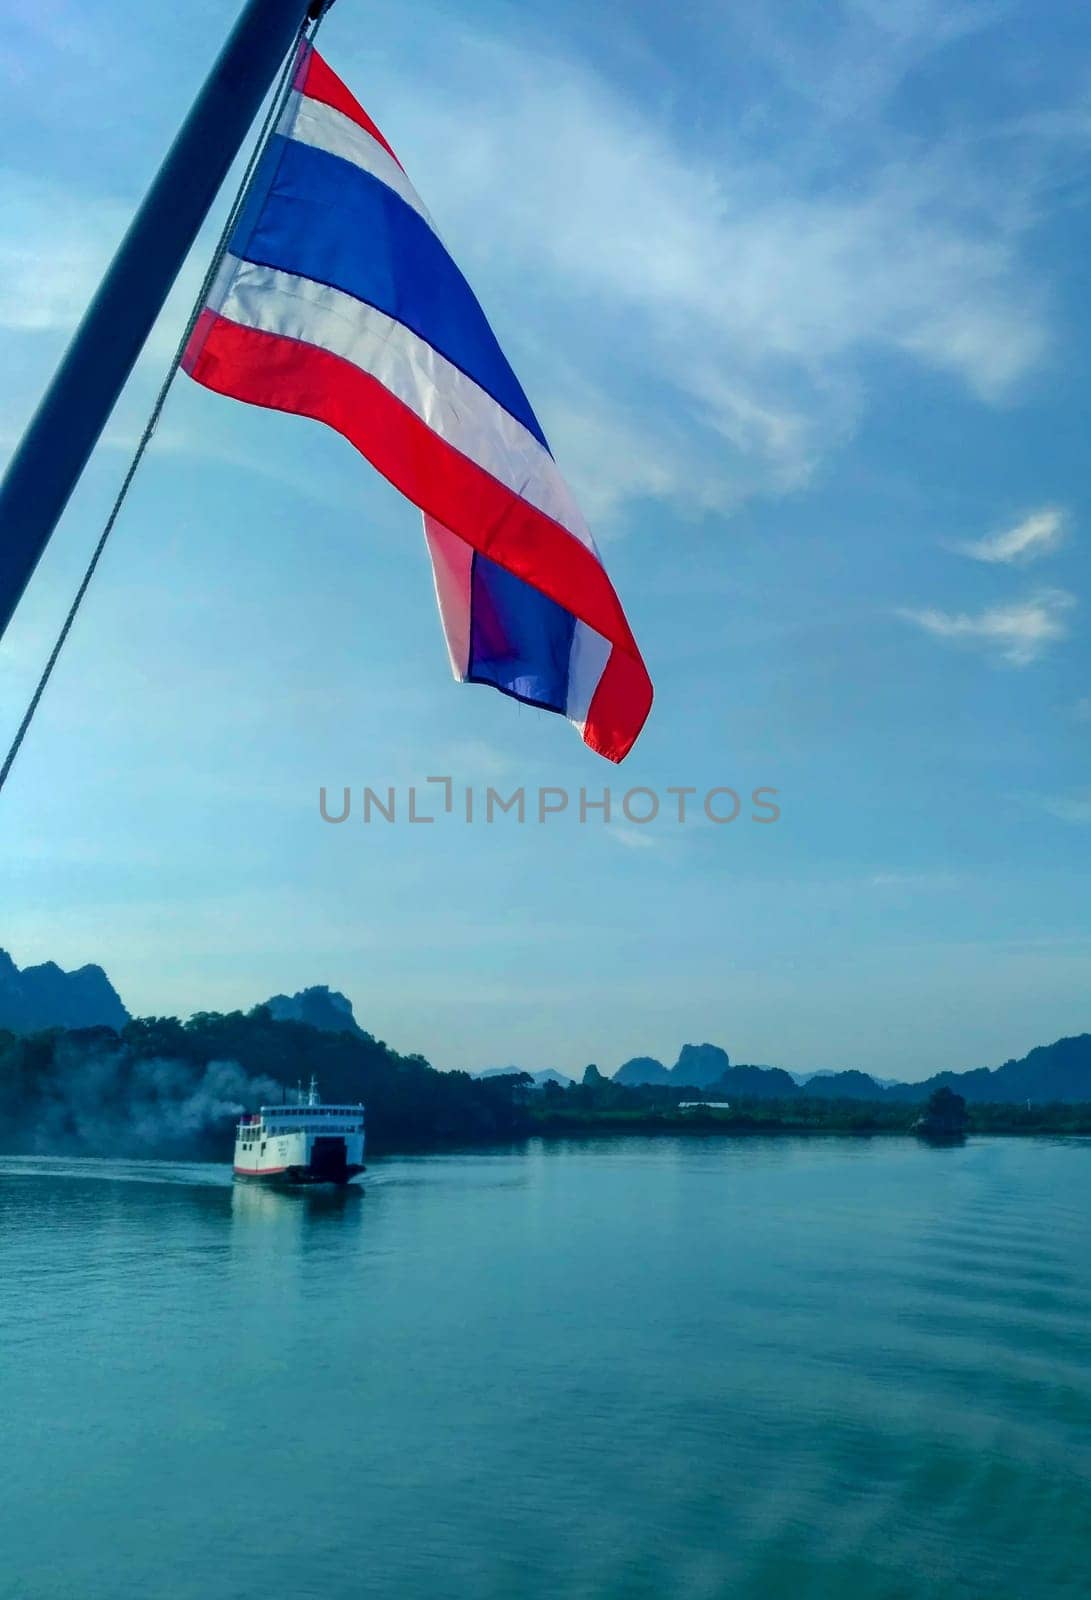 The Kingdom of Thailand flag, sea port, boats, ships, sky, clouds beautiful background, flag on pole waves on wind, state independence symbol, Thai national sign, red, white, blue color stripes banner